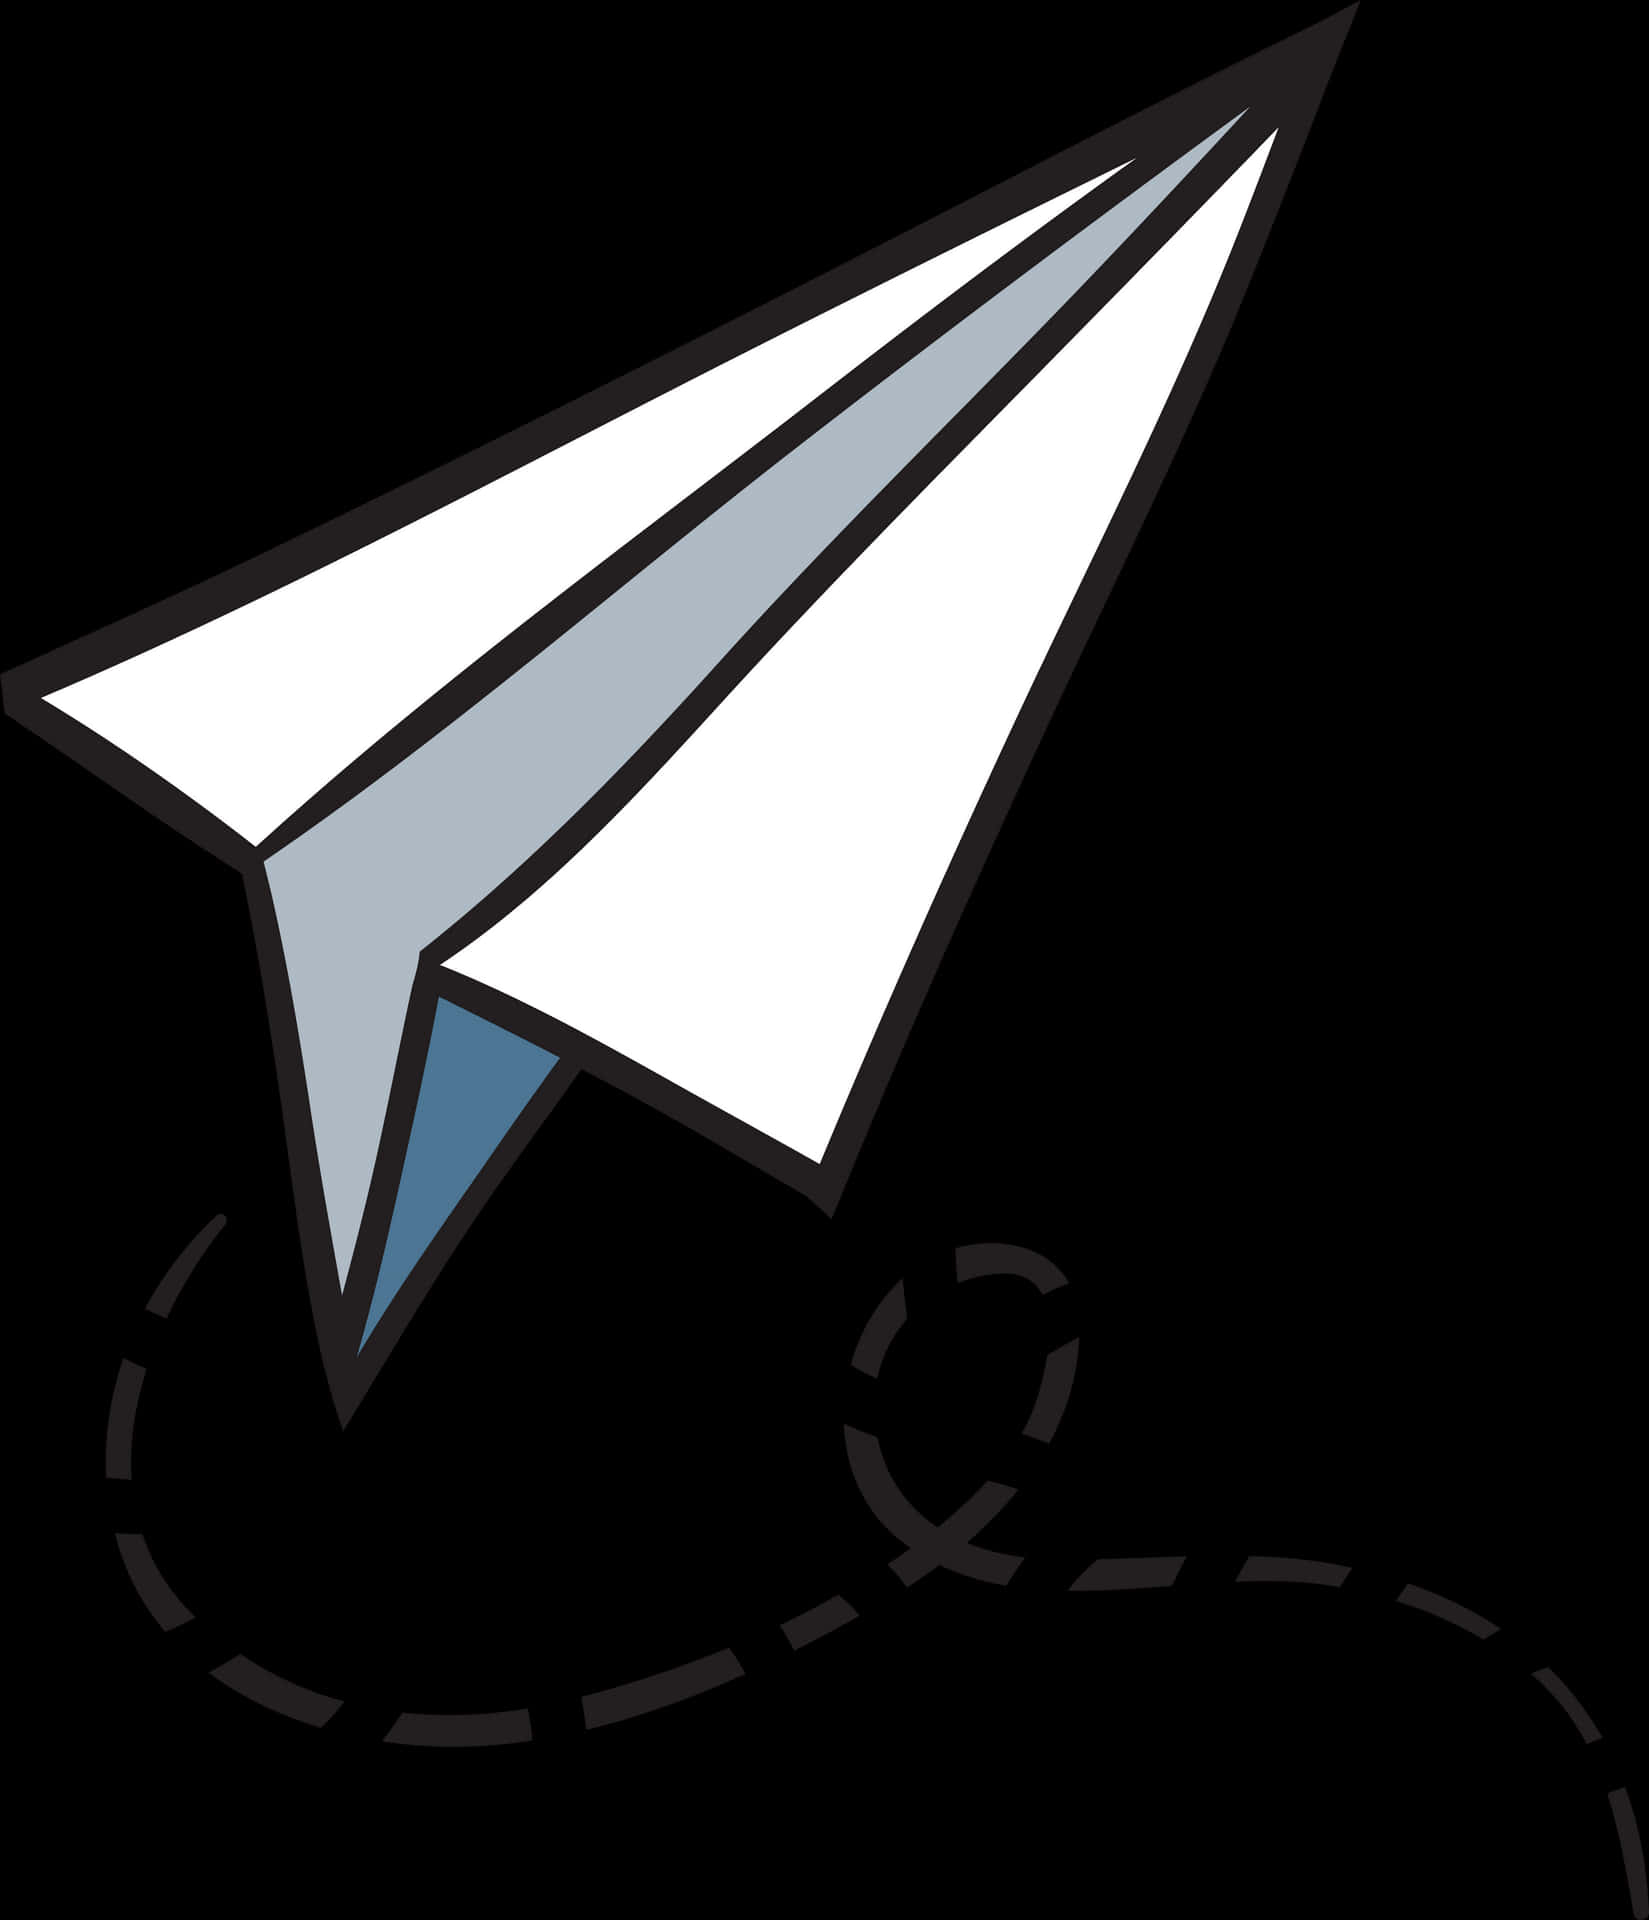 Paper Airplane Vector Illustration PNG